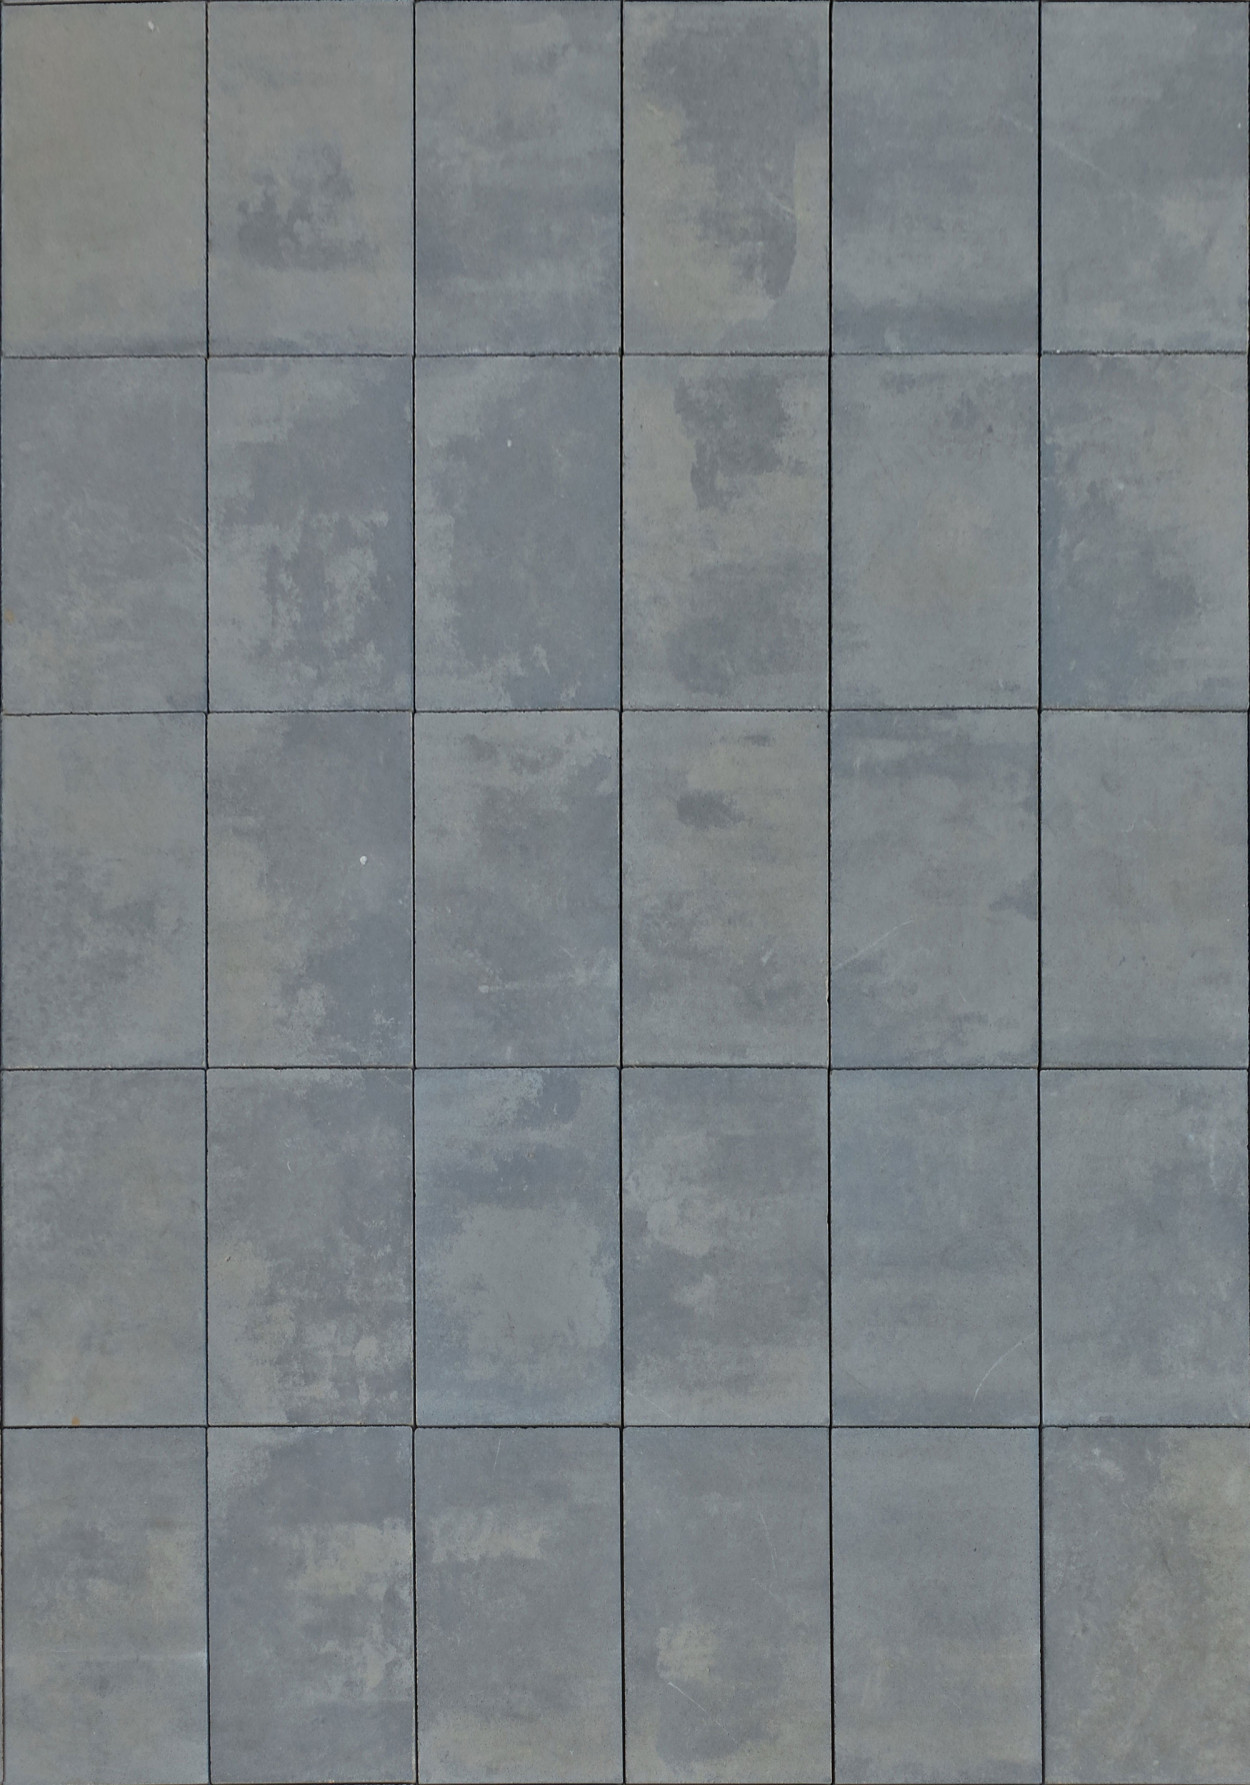 A seamless concrete block floor texture for use in architectural drawings and 3D models